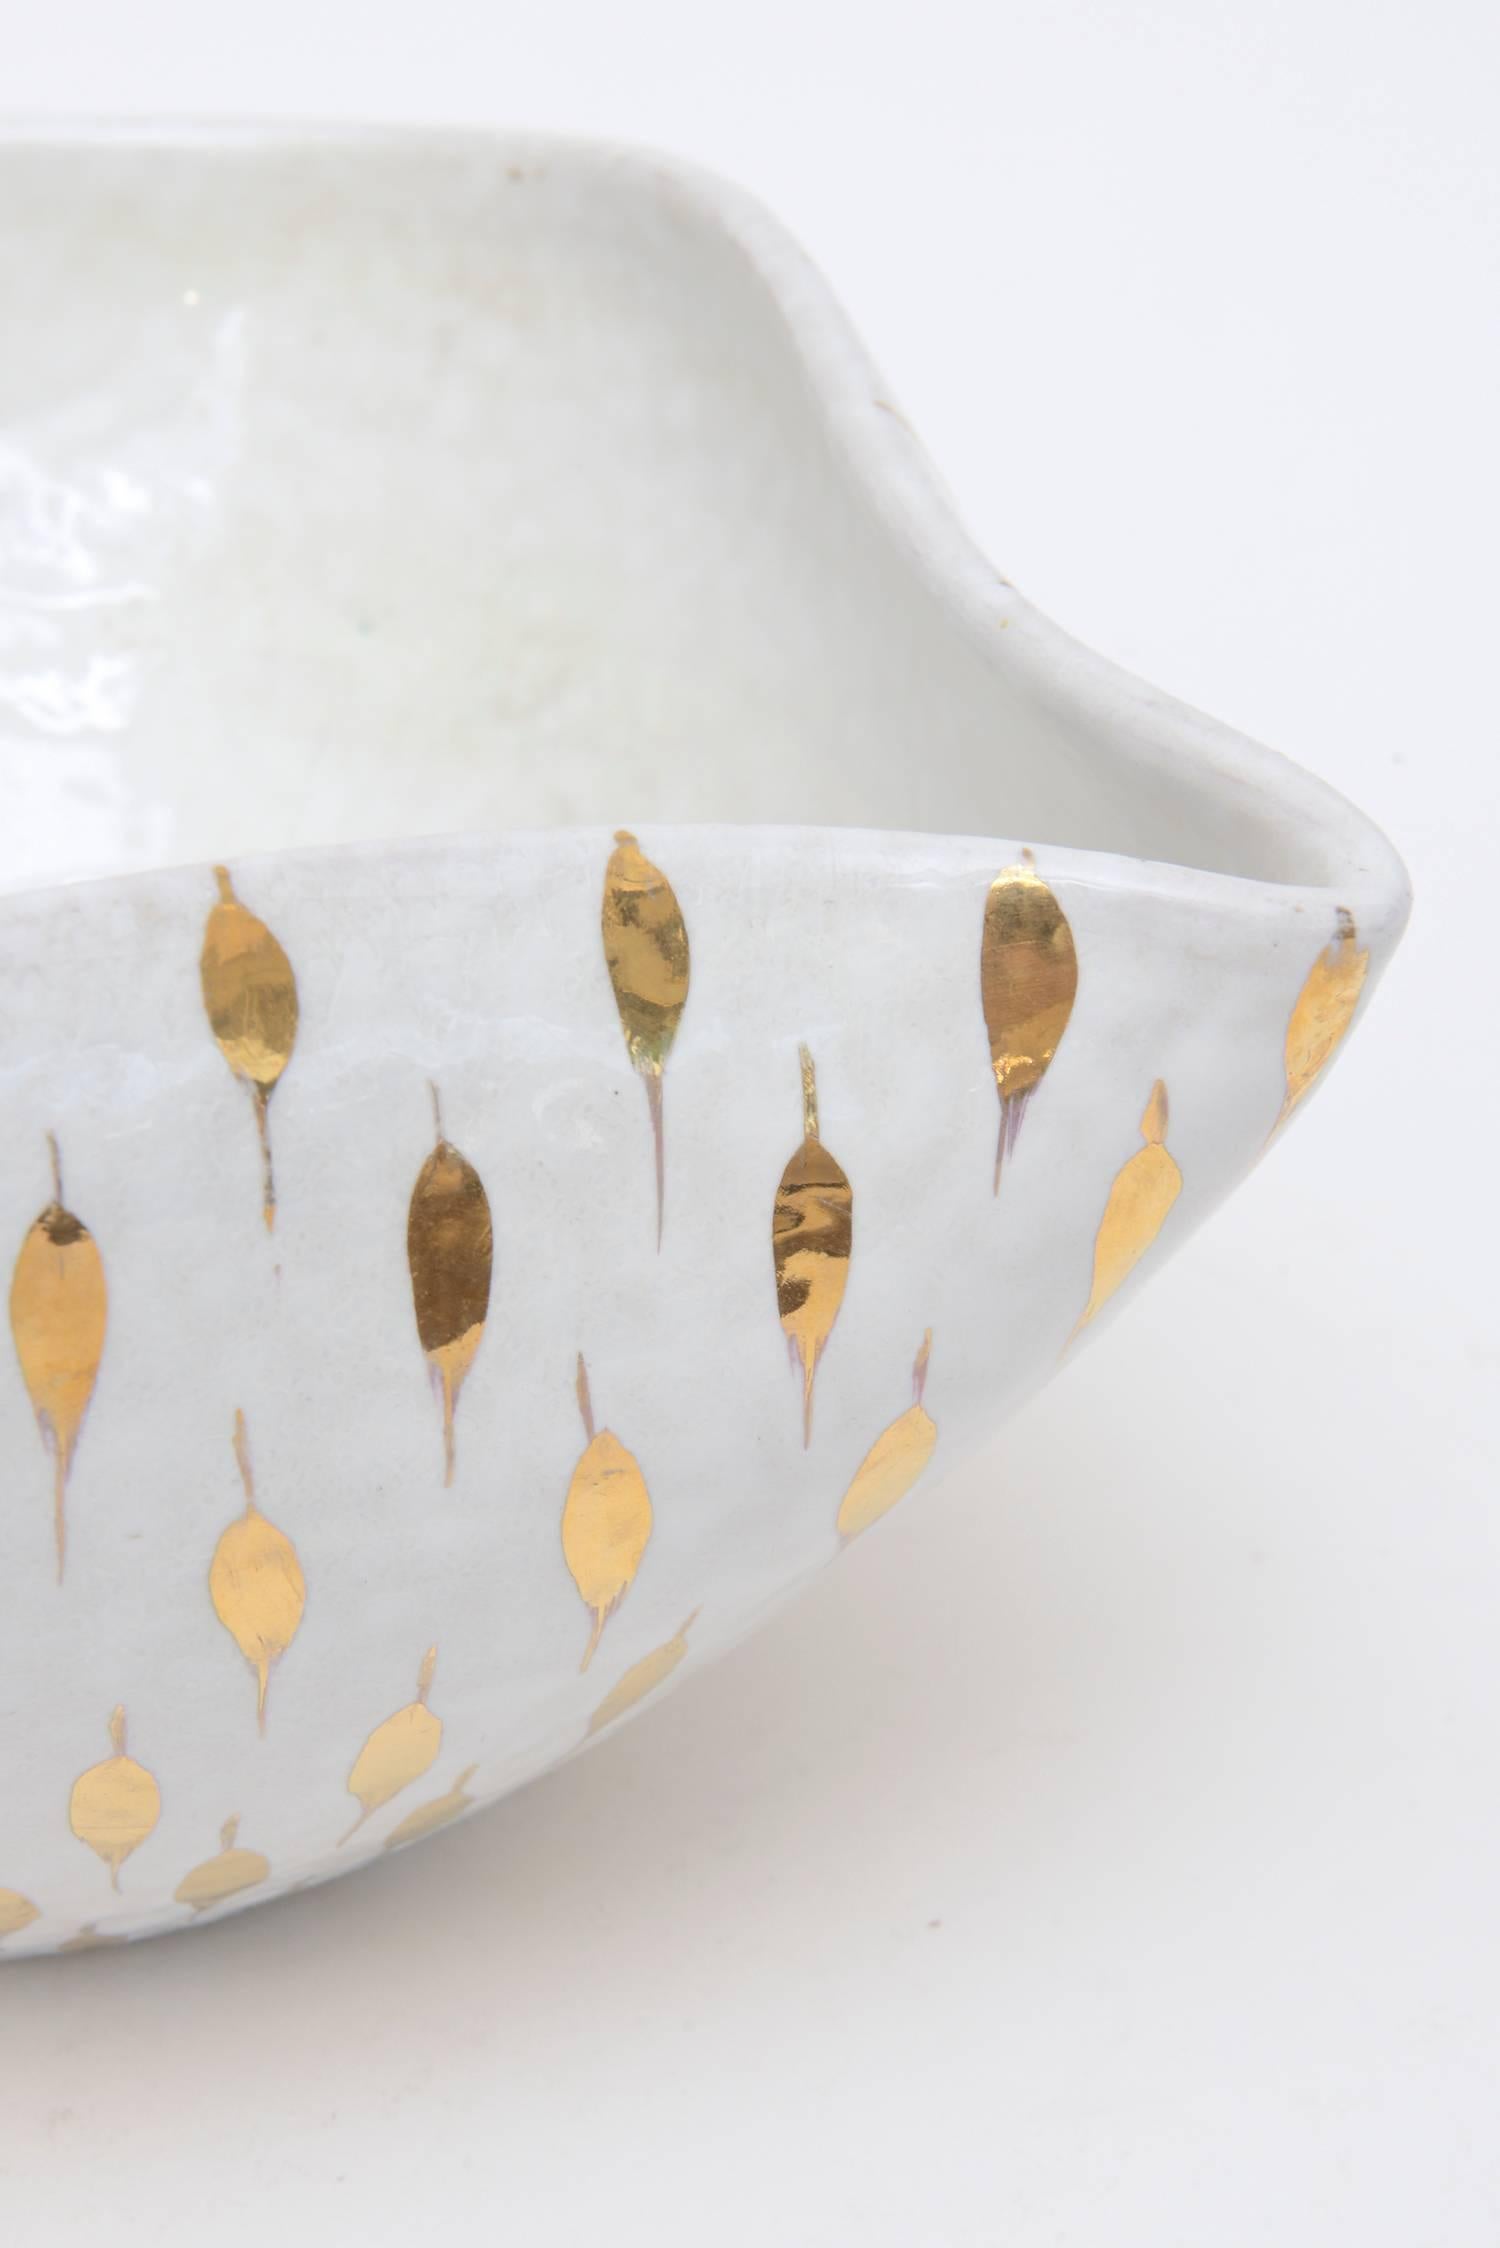 Aldo Londi For Bitossi Feather Plume Ceramic Bowl Vintage White And Gold For Sale 2